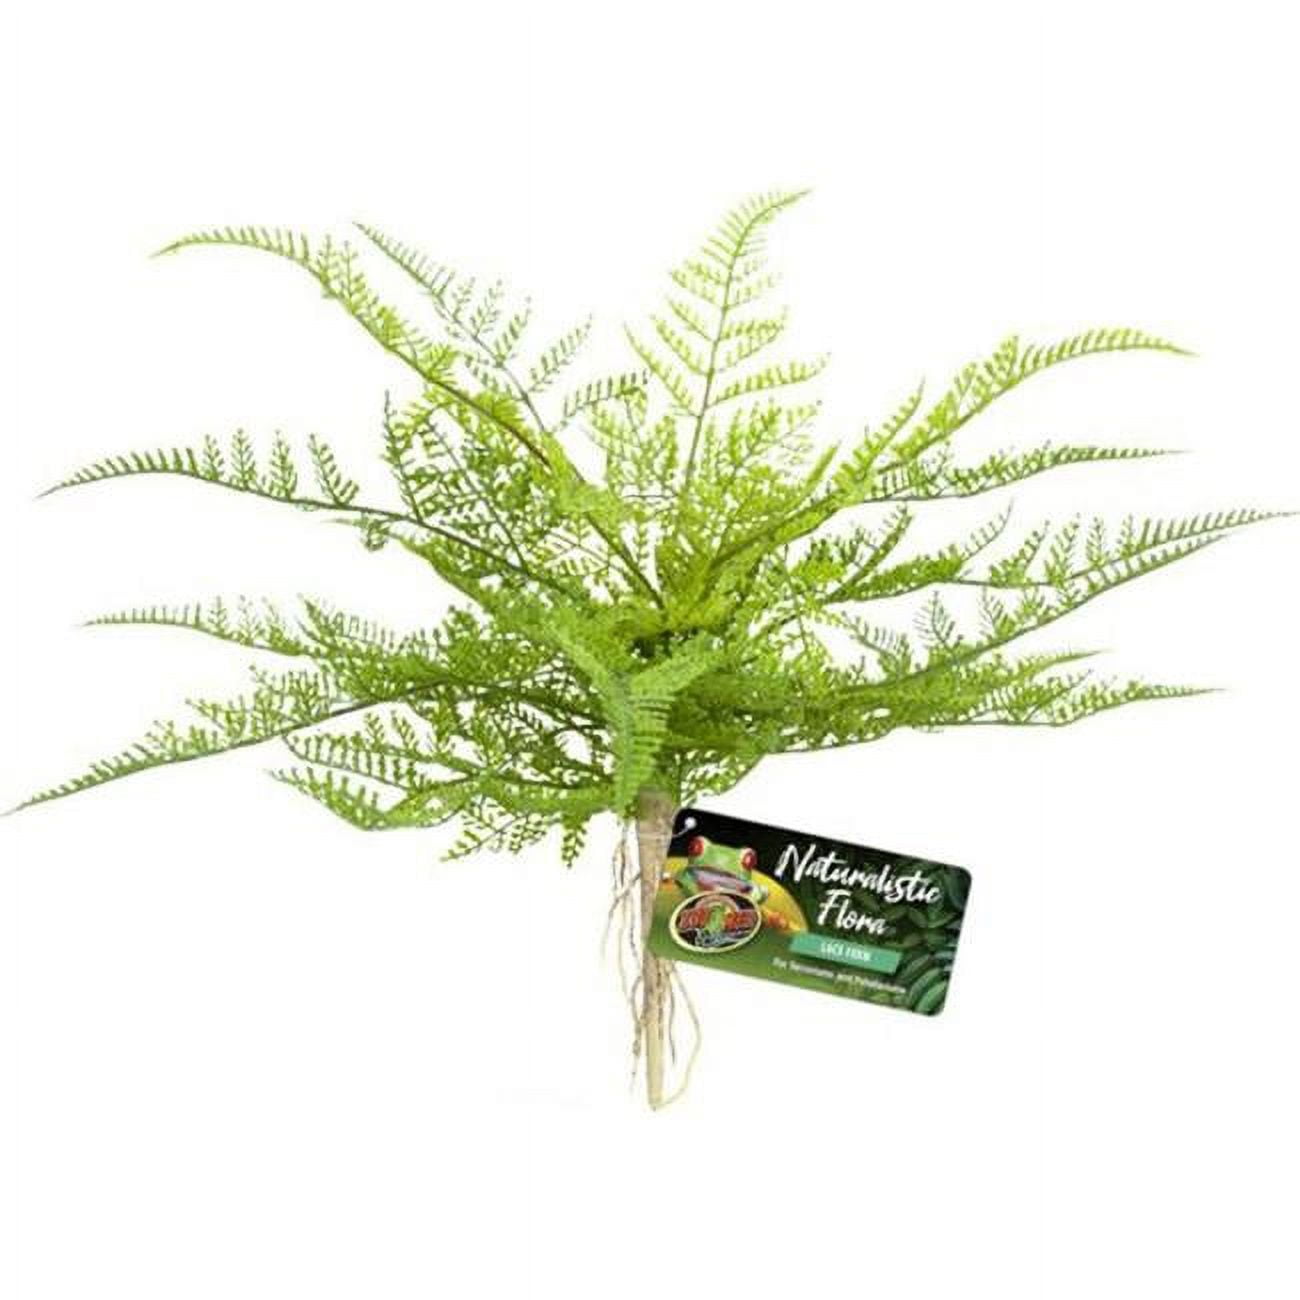 Picture of Zoo Med Laboratories BU-62 Naturalistic Flora Lace Fern